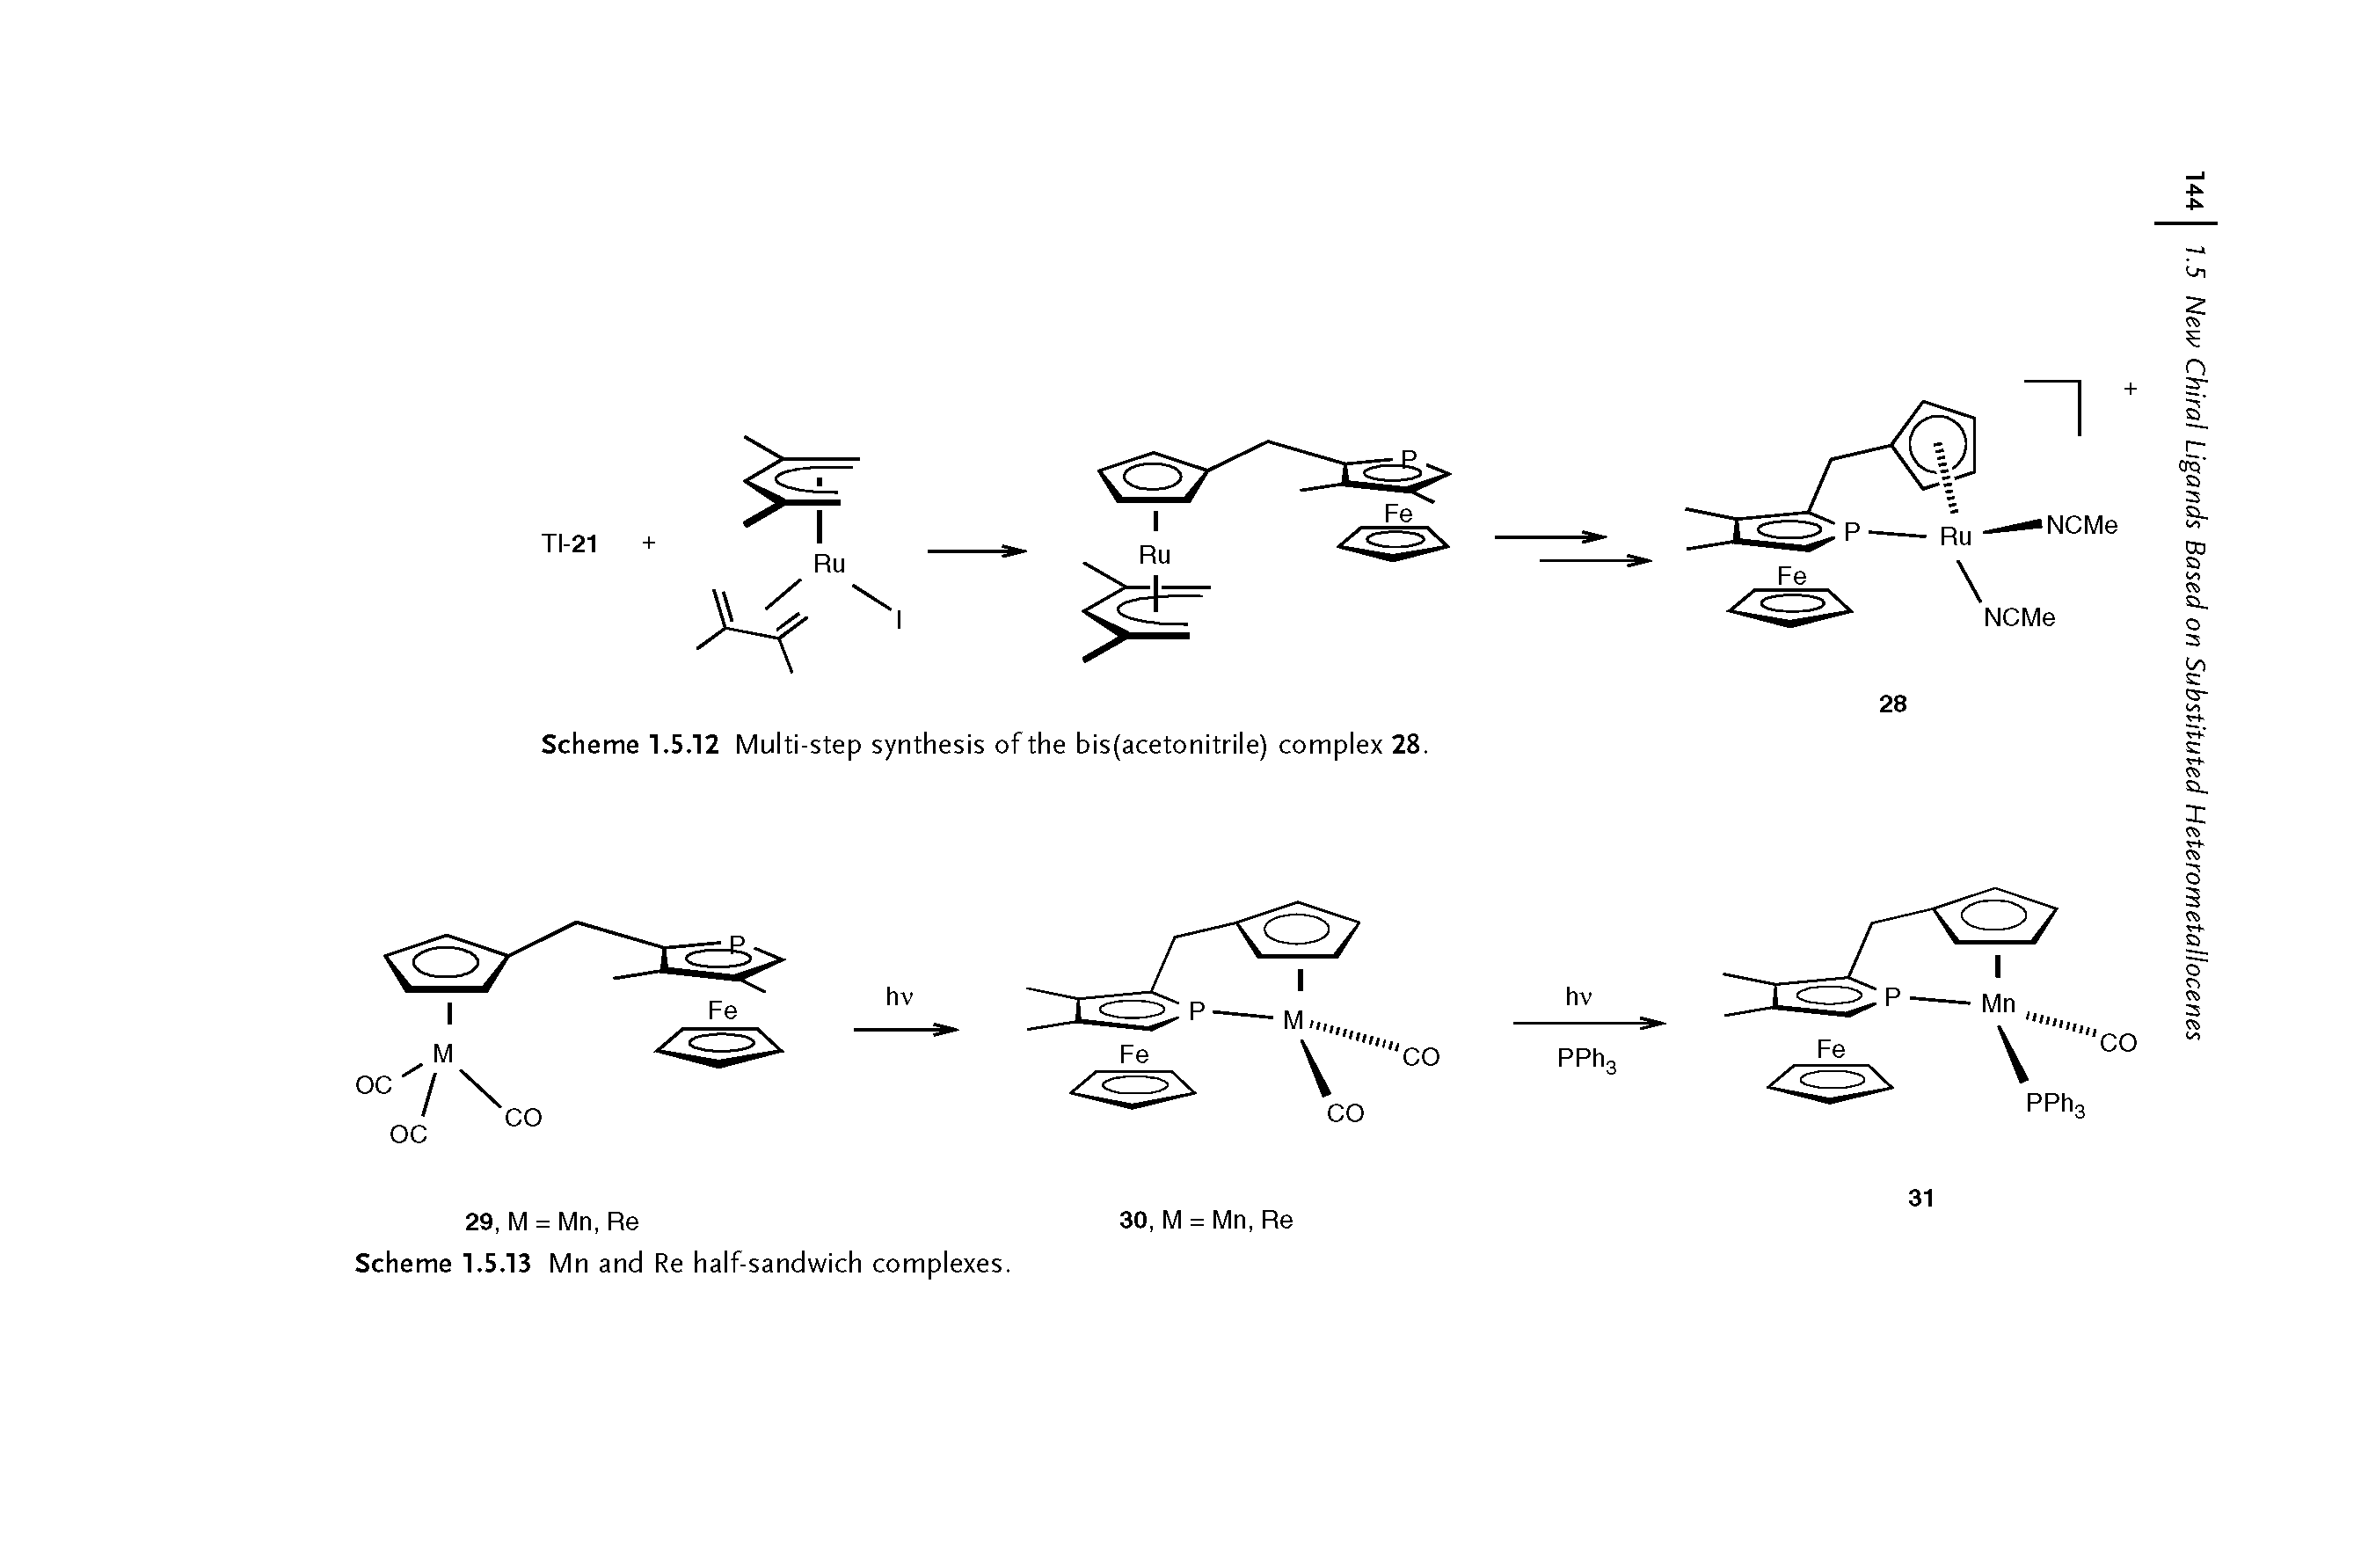 Scheme 1,5.12 Multi-step synthesis of the bis(acetonitrile) complex 28.